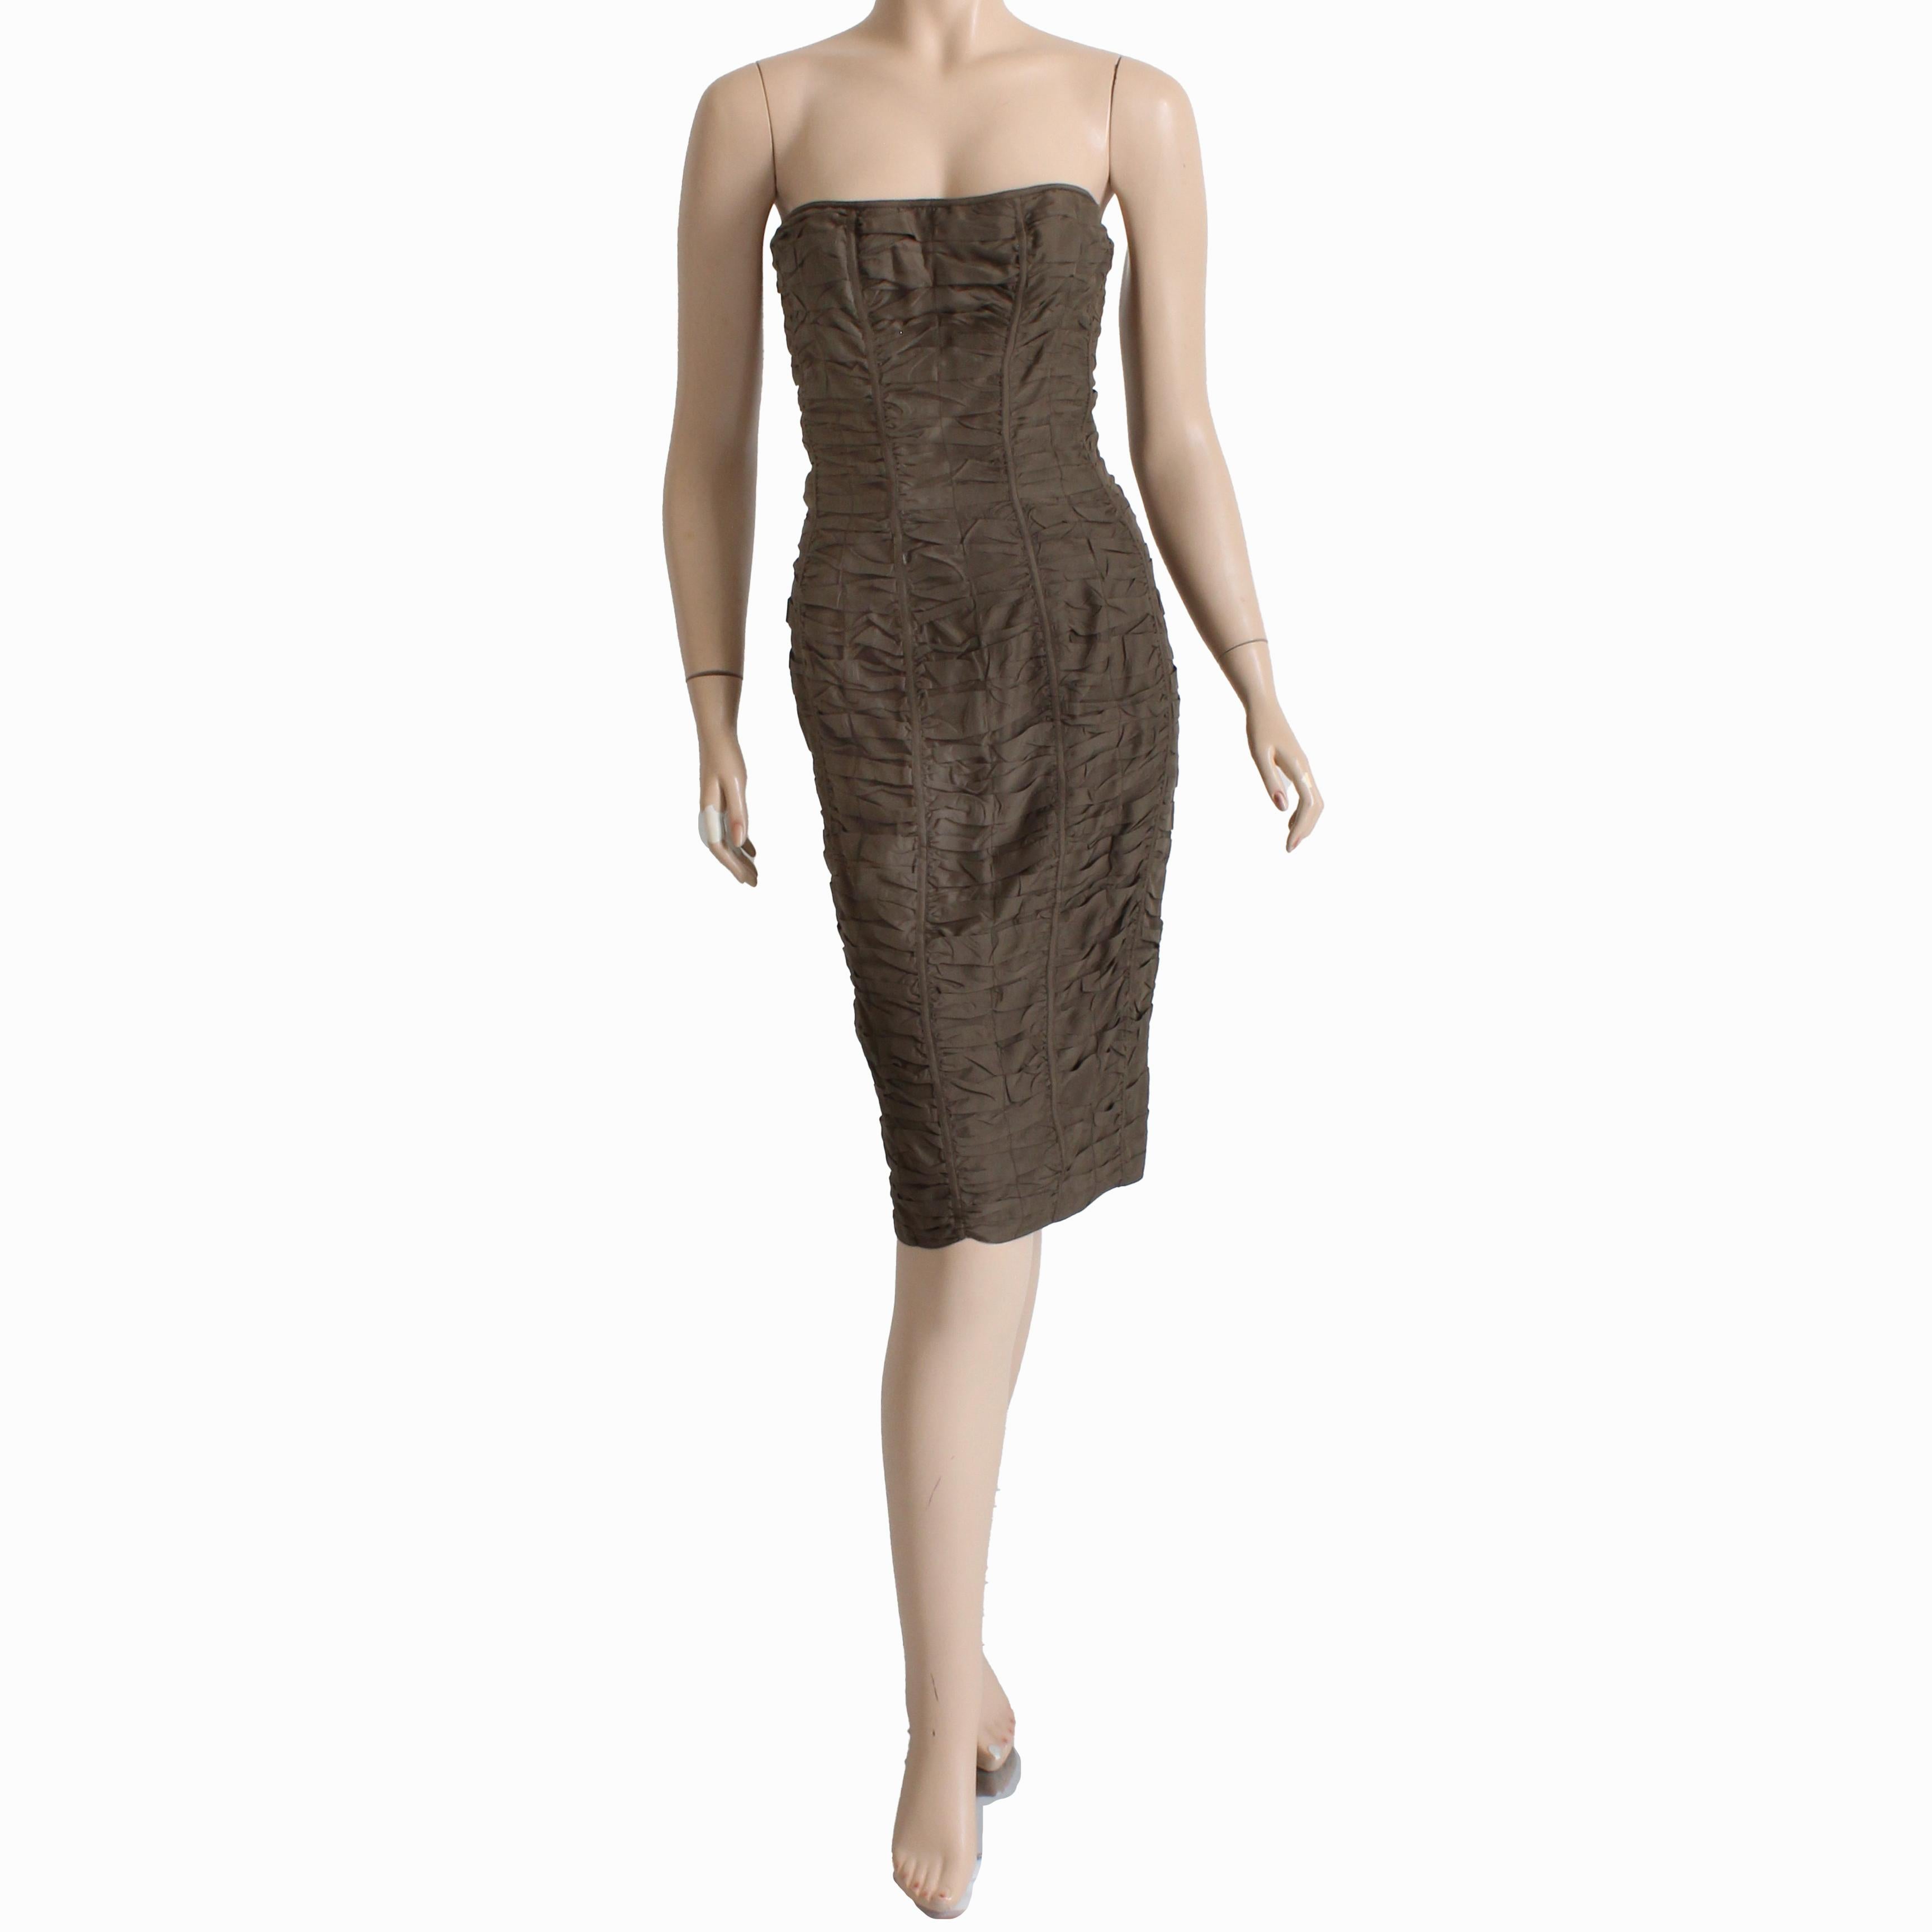 Preowned, vintage and authentic Gucci strapless brown ruched silk dress, from the Spring 2001 collection (Tom Ford era).  Made from an umber-hued brown silk, it features a corset or bustier lined bodice and a sophisticated fitted silhouette with a